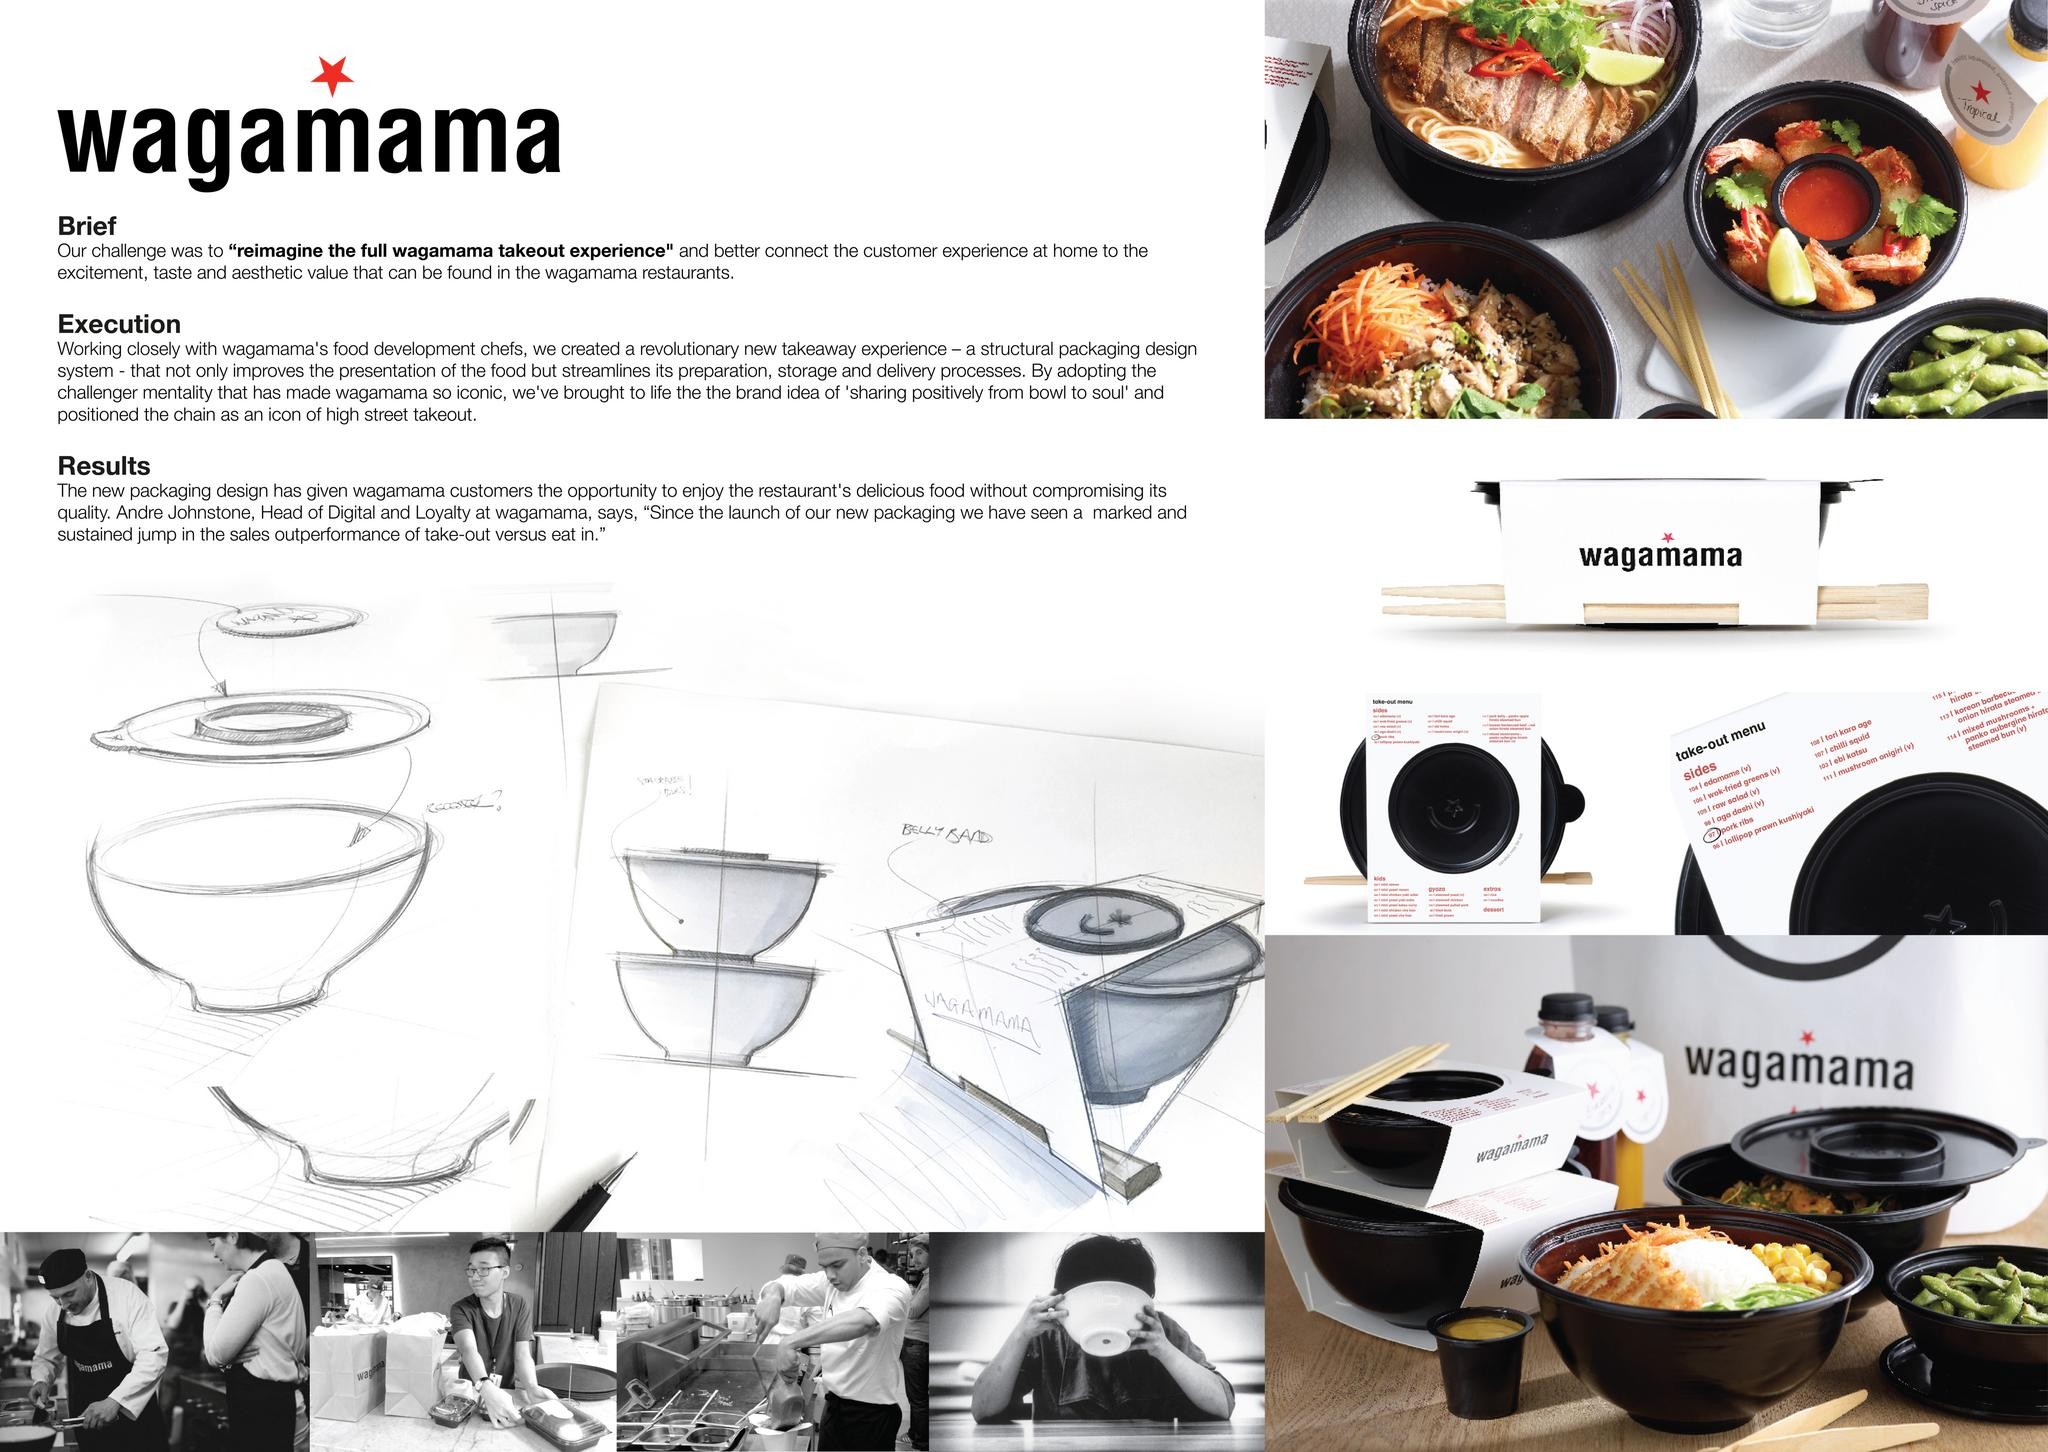 Wagamama Takeout Experience